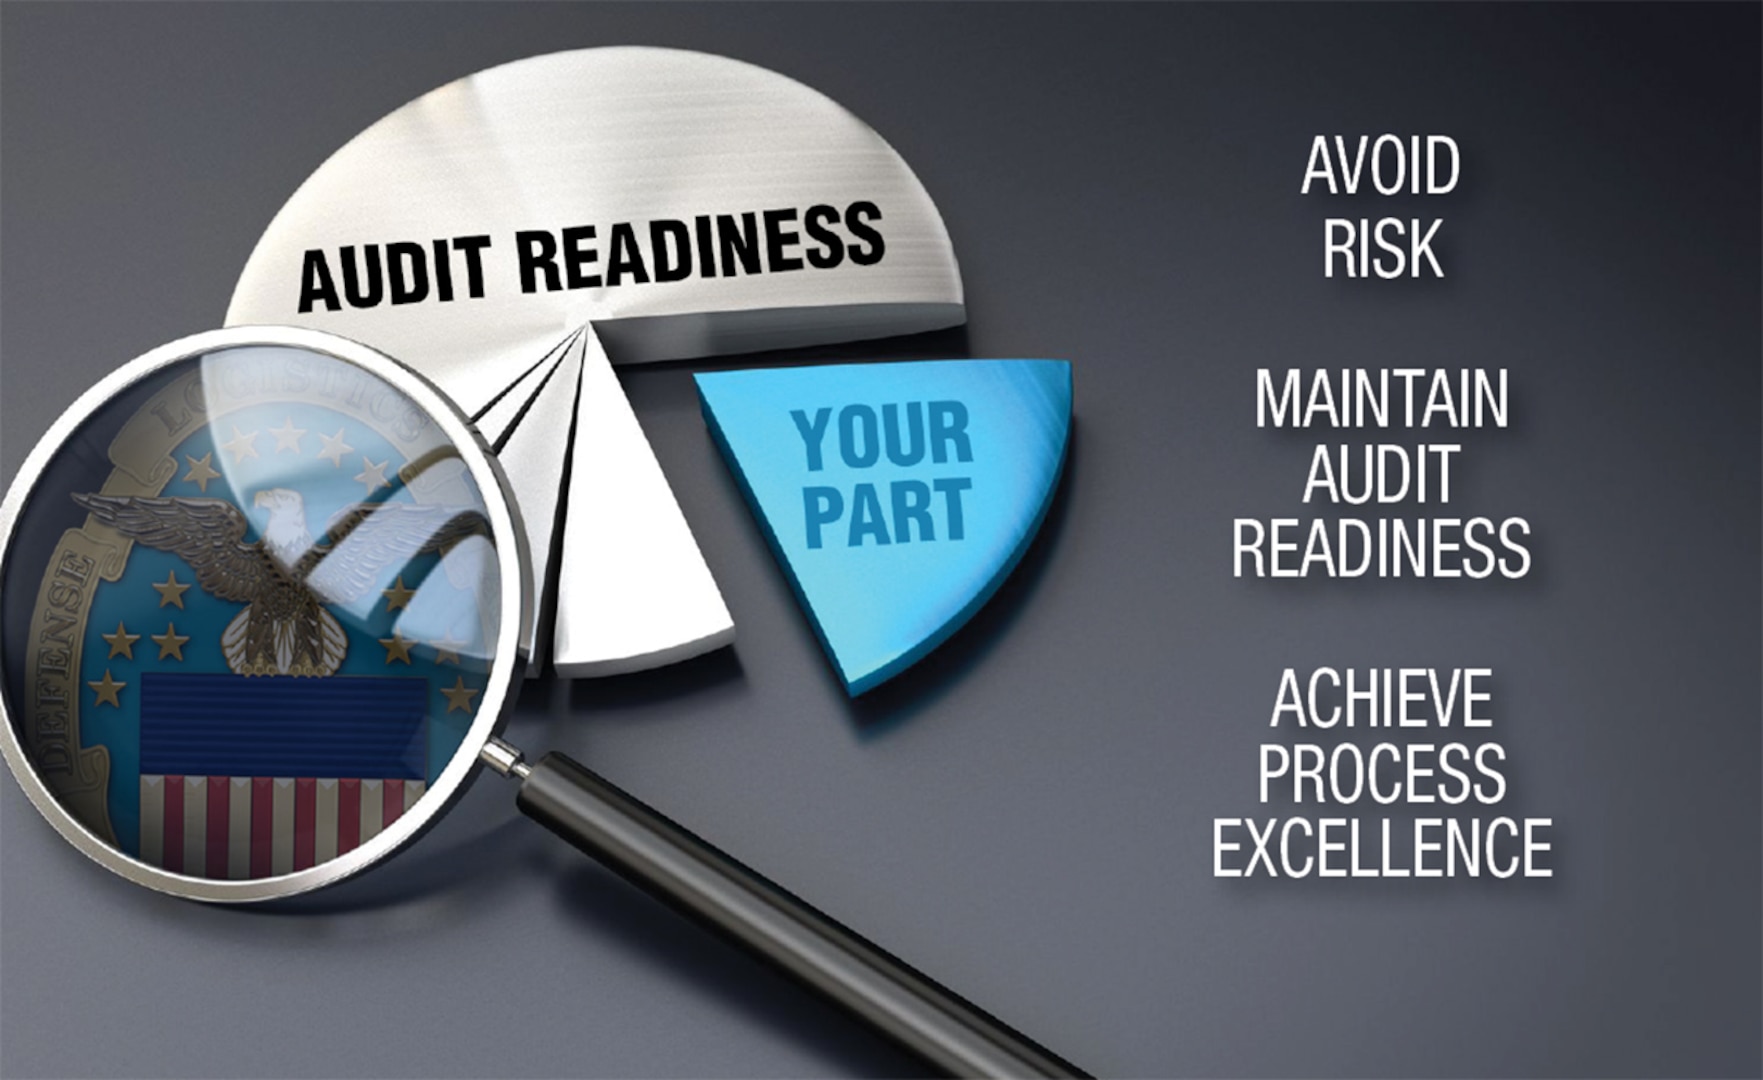 Your part in Audit Readiness